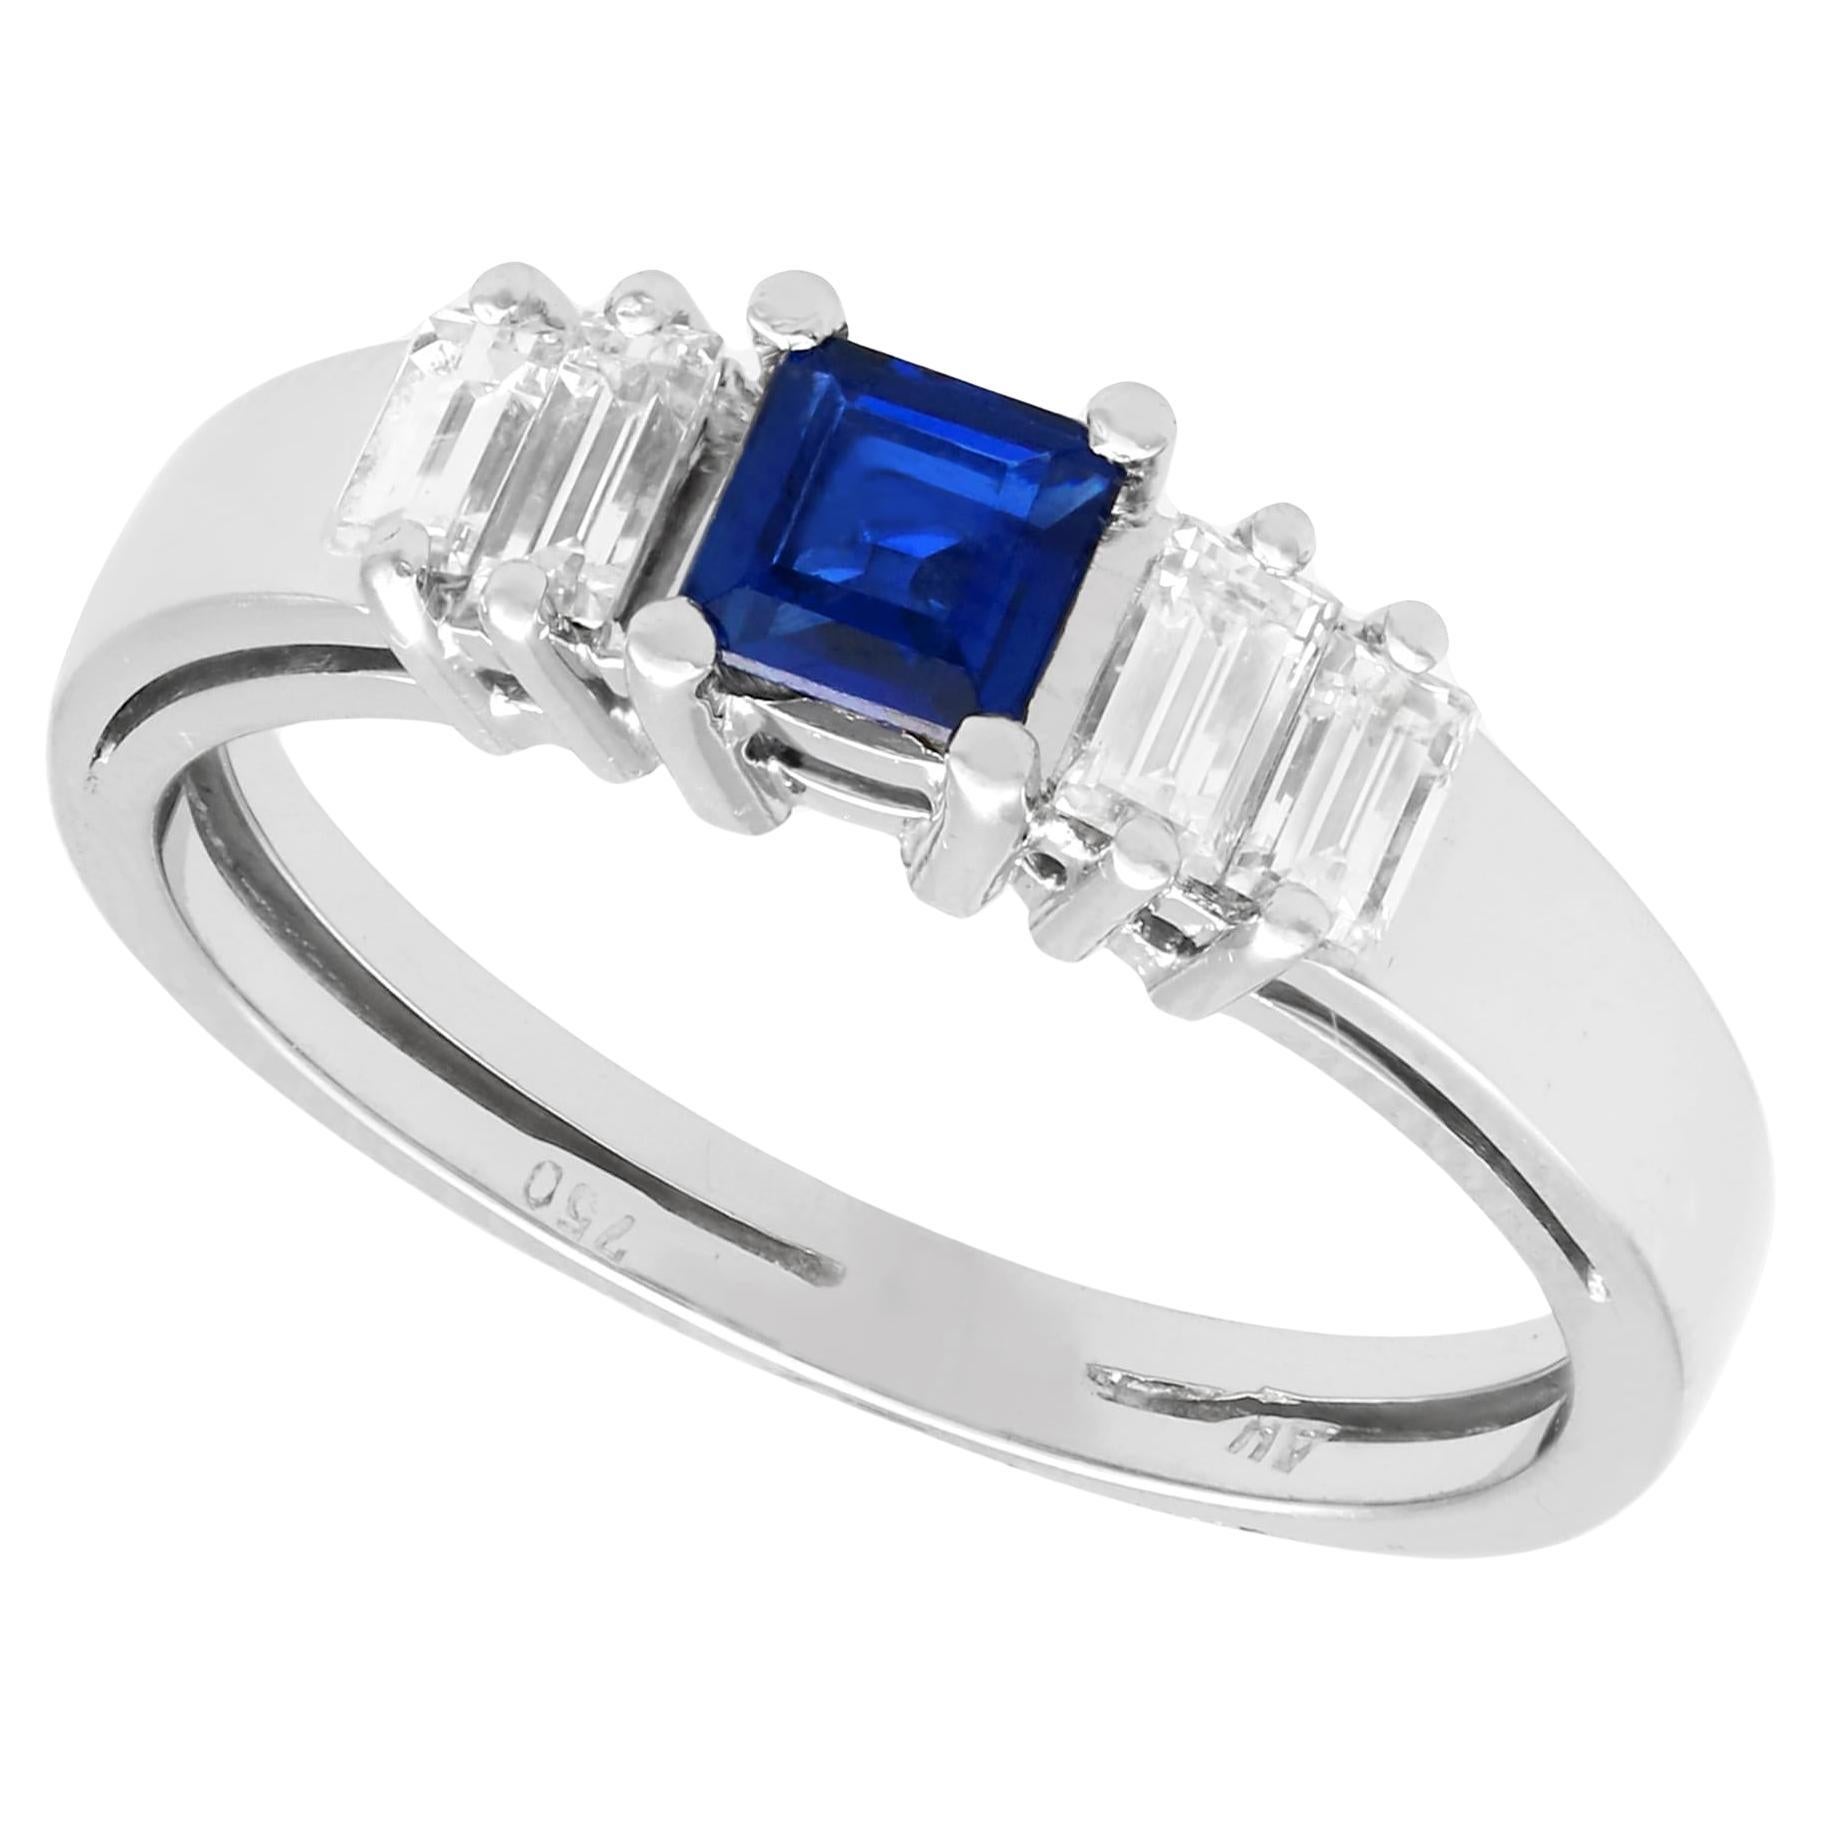 Vintage Sapphire, Diamond and White Gold Cocktail Ring